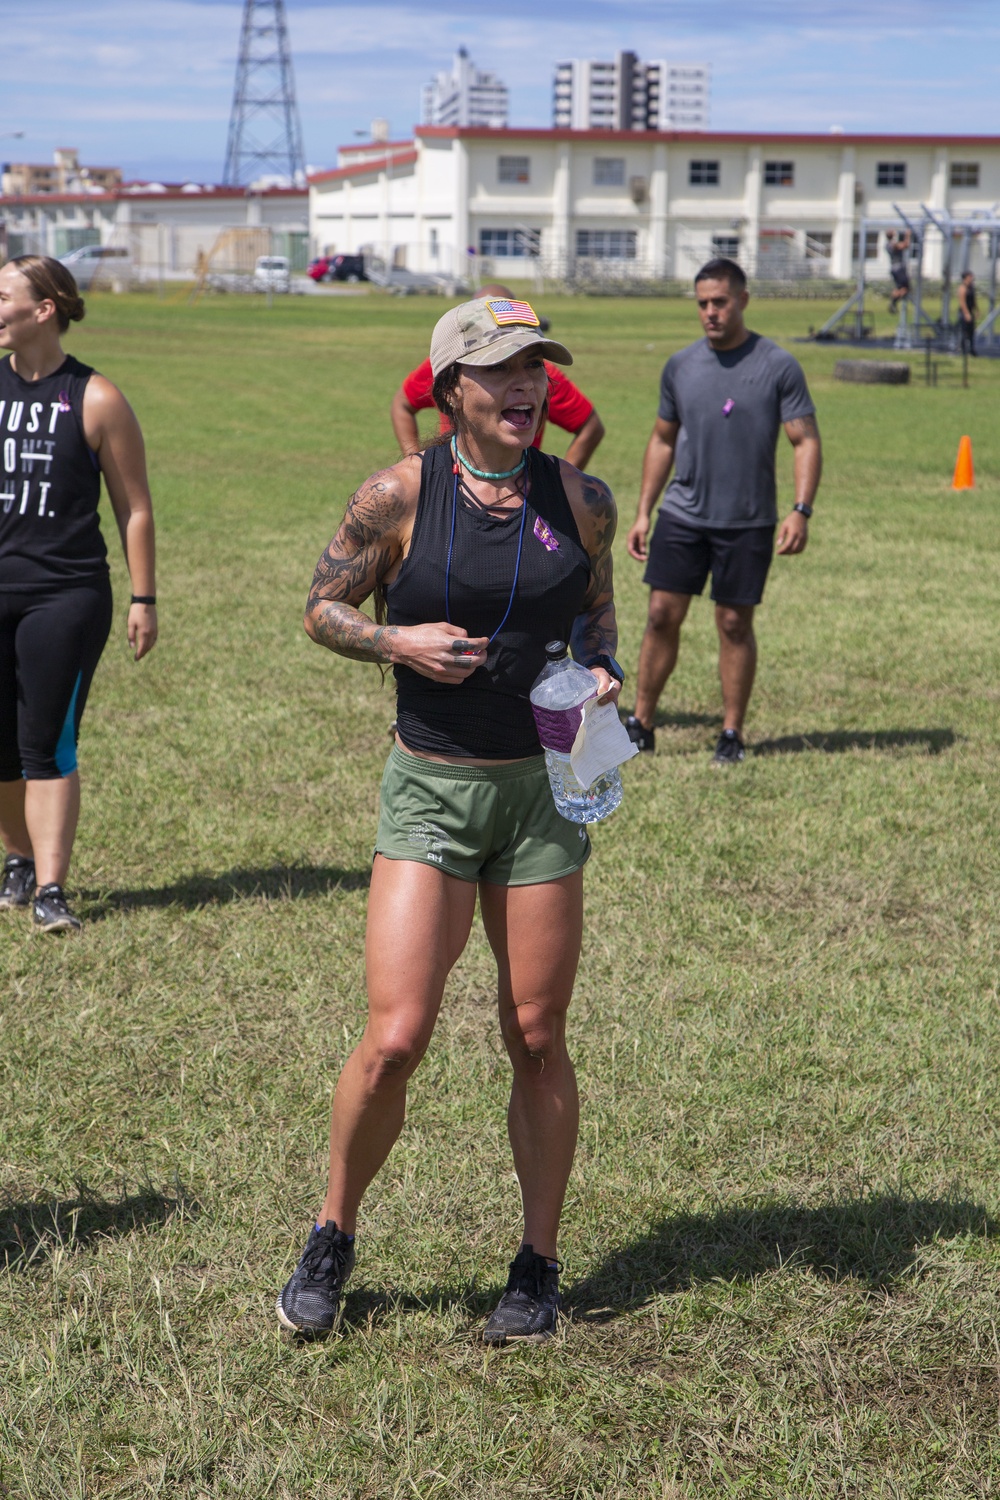 Ashley Horner comes to Okinawa for Camp Valor HIIT Workout